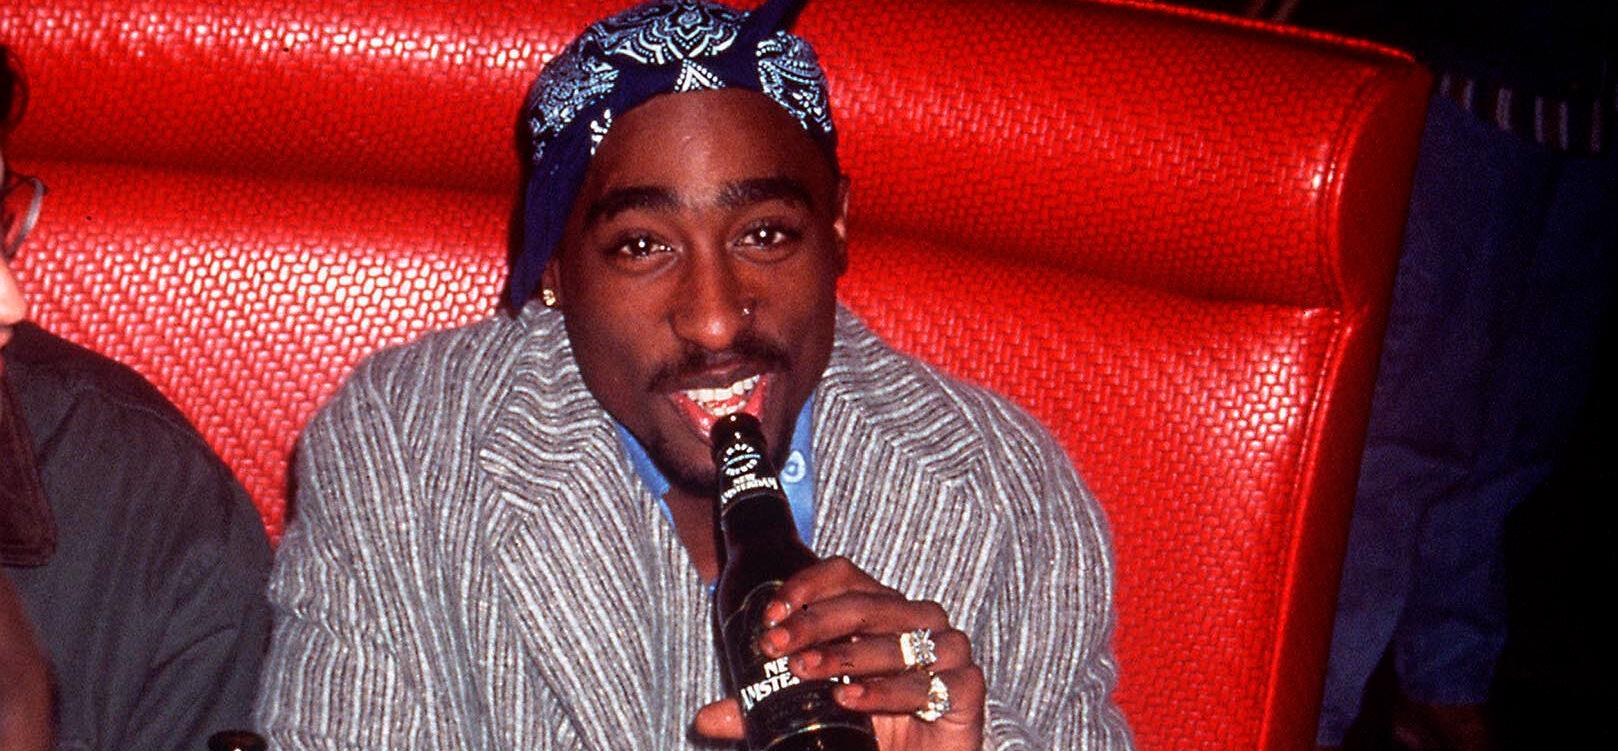 The Man Charged With Tupac Shakur’s Murder Mugshot Revealed